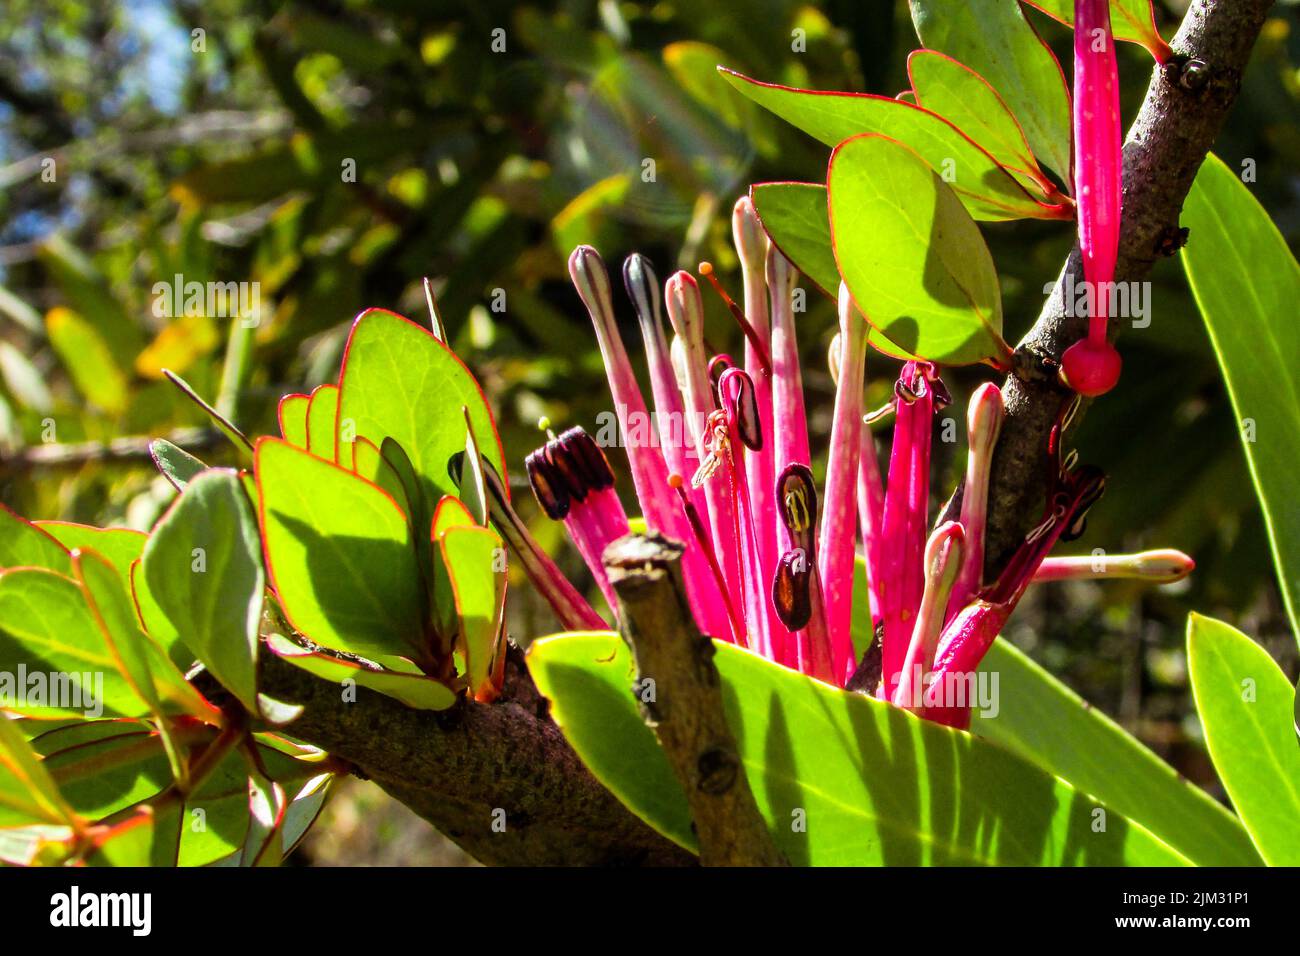 Bright pink flowers of the parasitic, Tapinanthus oleifolius, a type of Mistletoe  called Voelent, growing on the branches of a common Suger bush Stock Photo